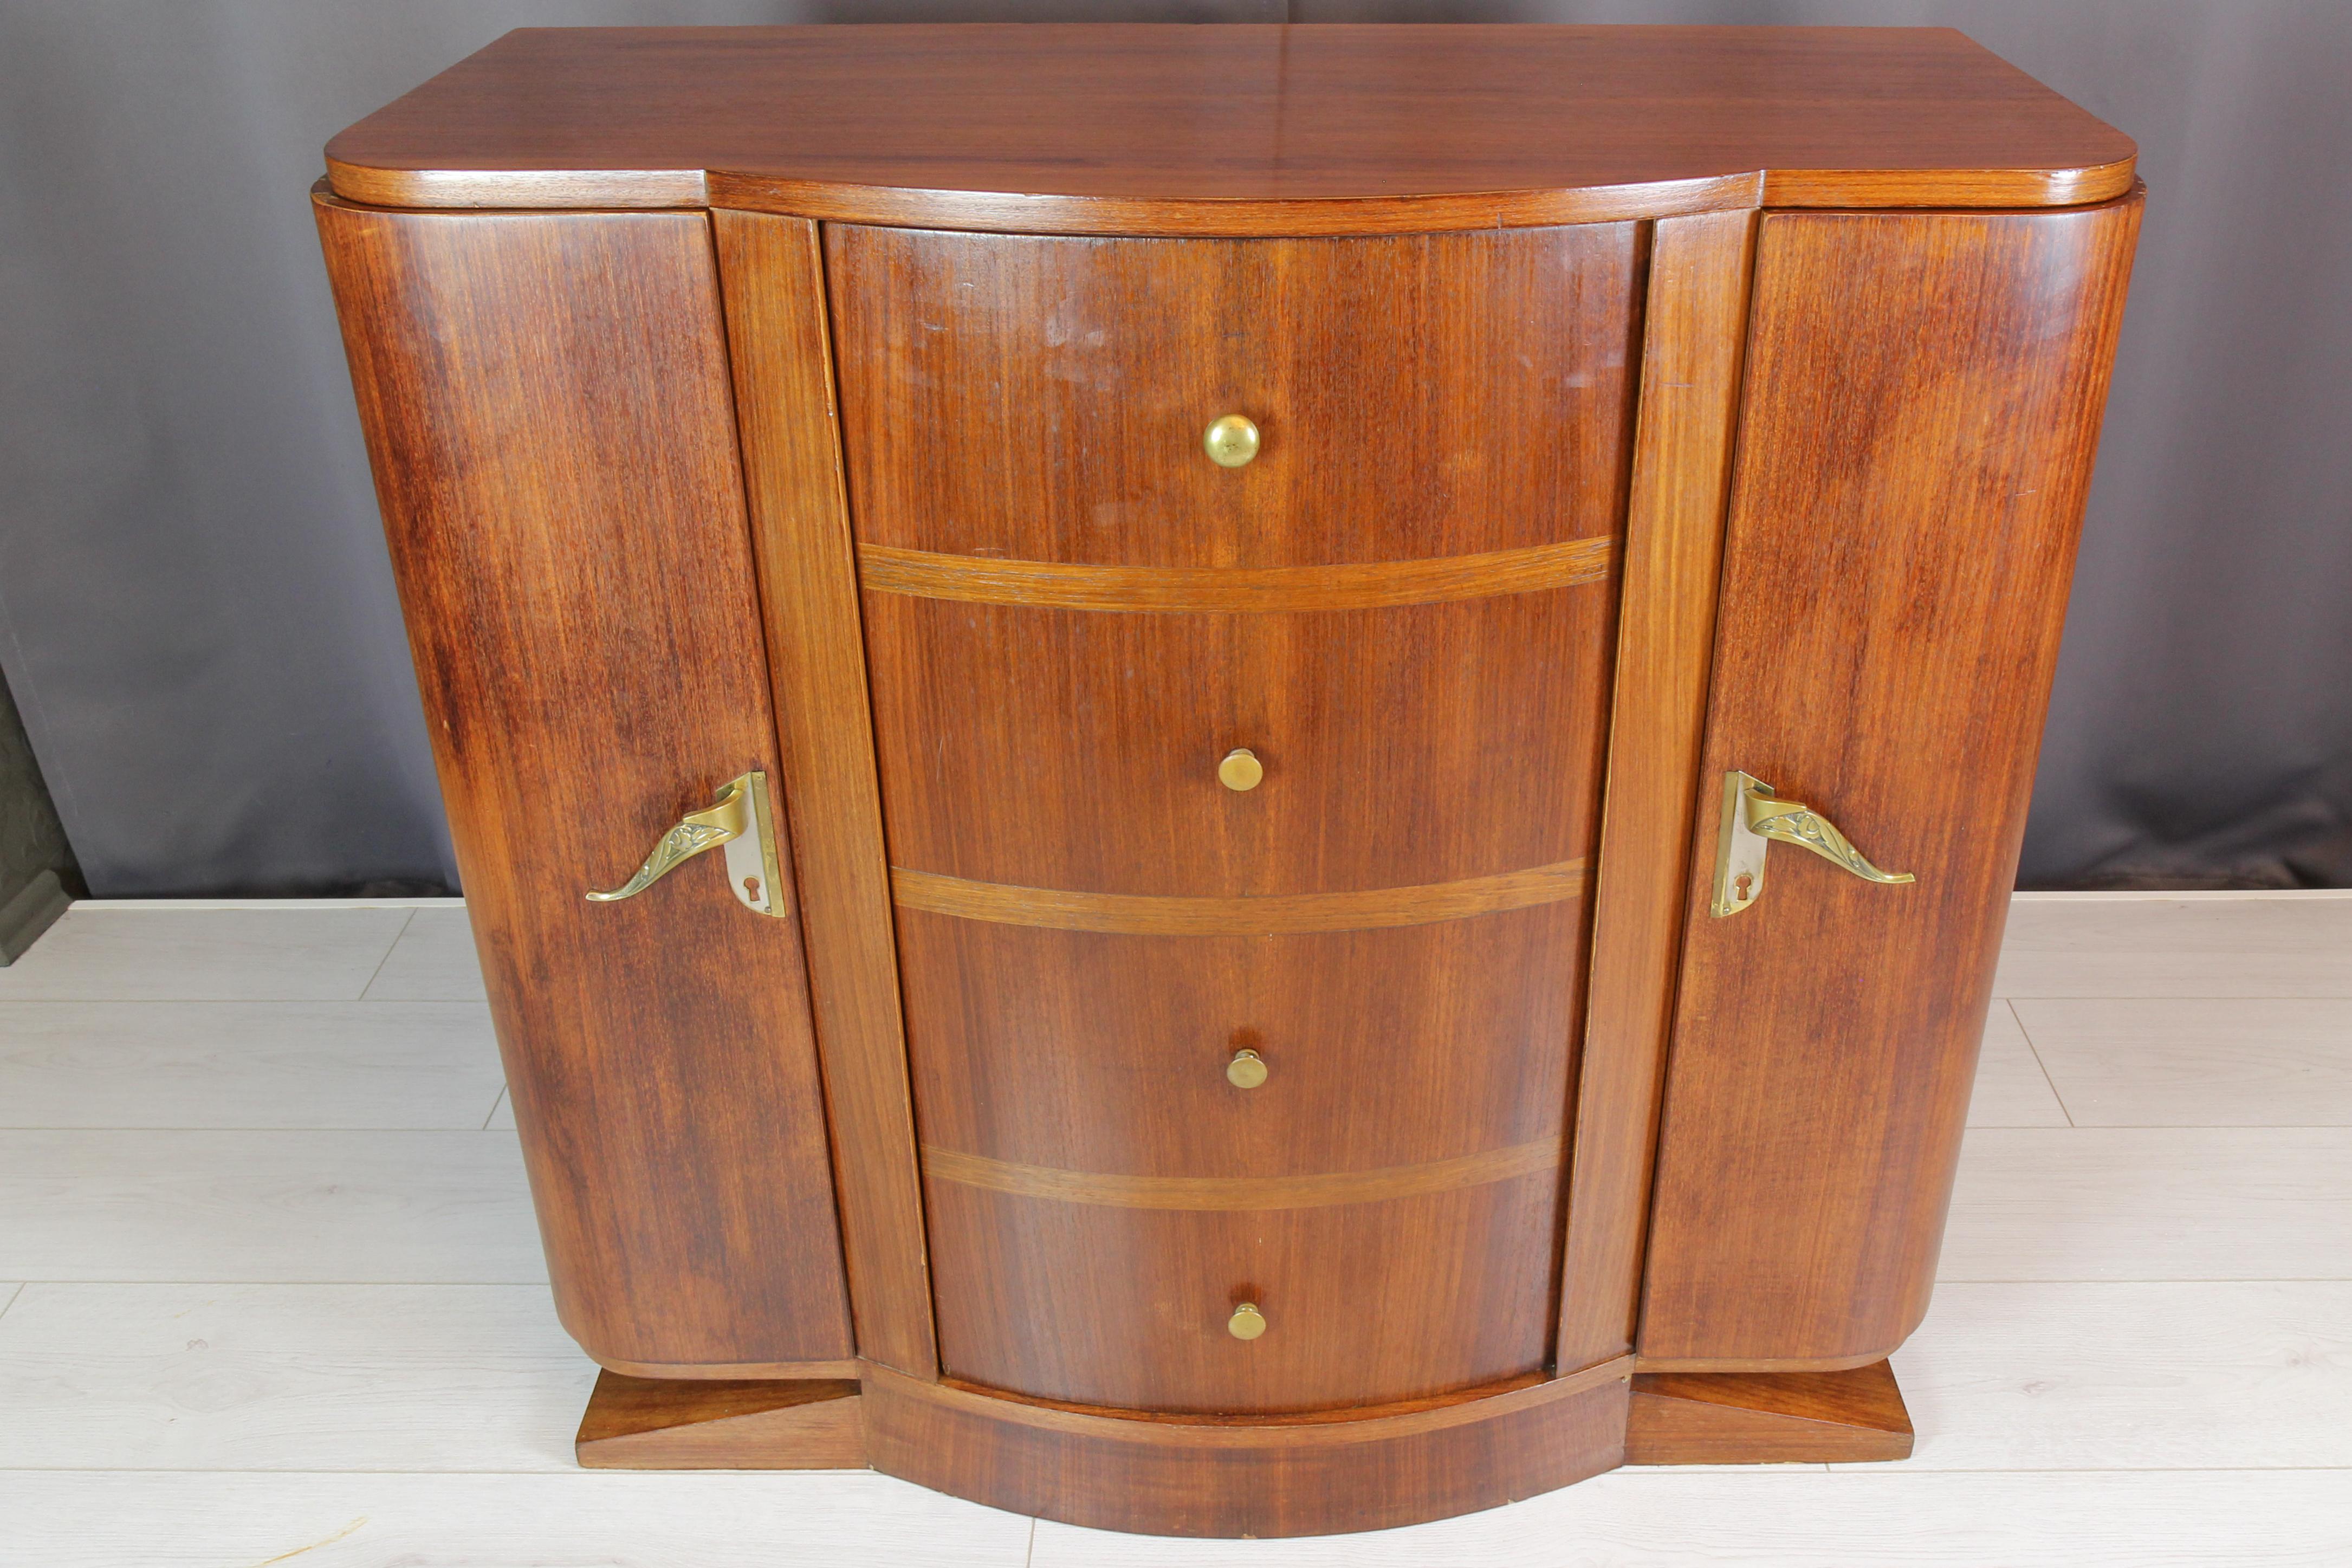 Veneer French Art Deco Sideboard with Radio and Record Player, 1930s For Sale